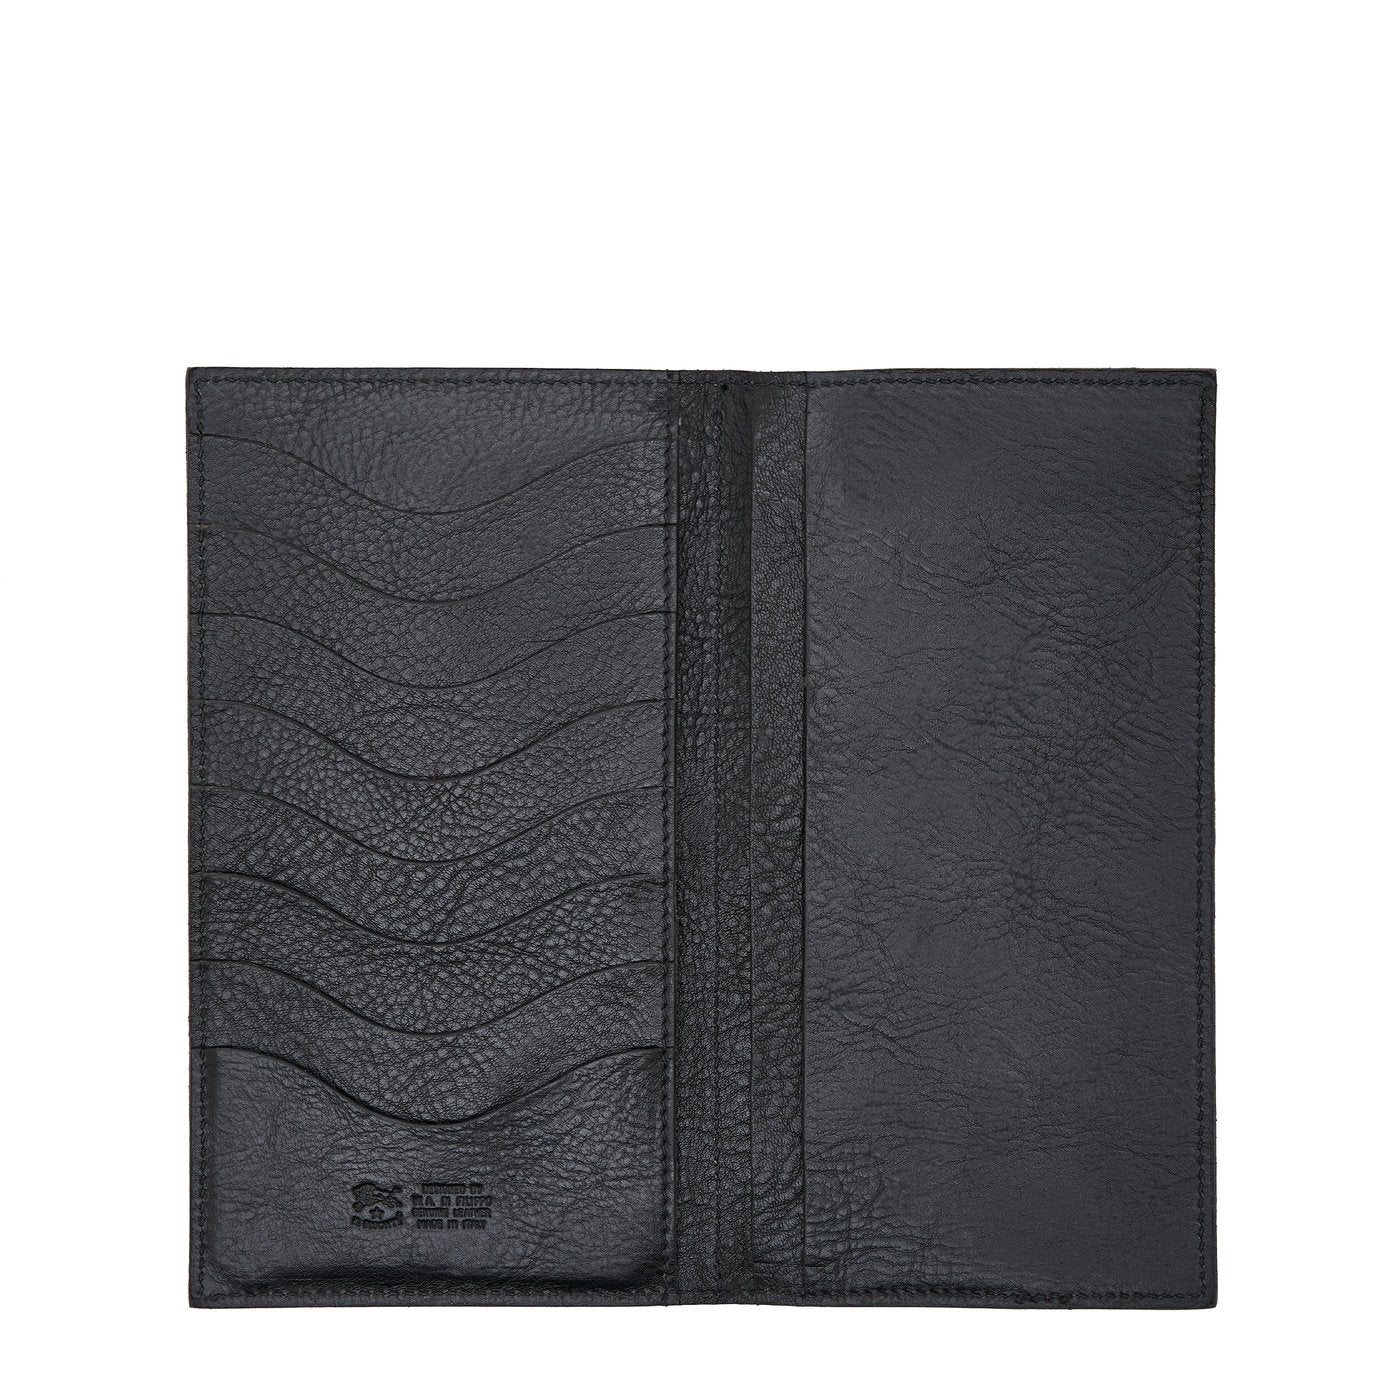 Wallet in calf leather color black